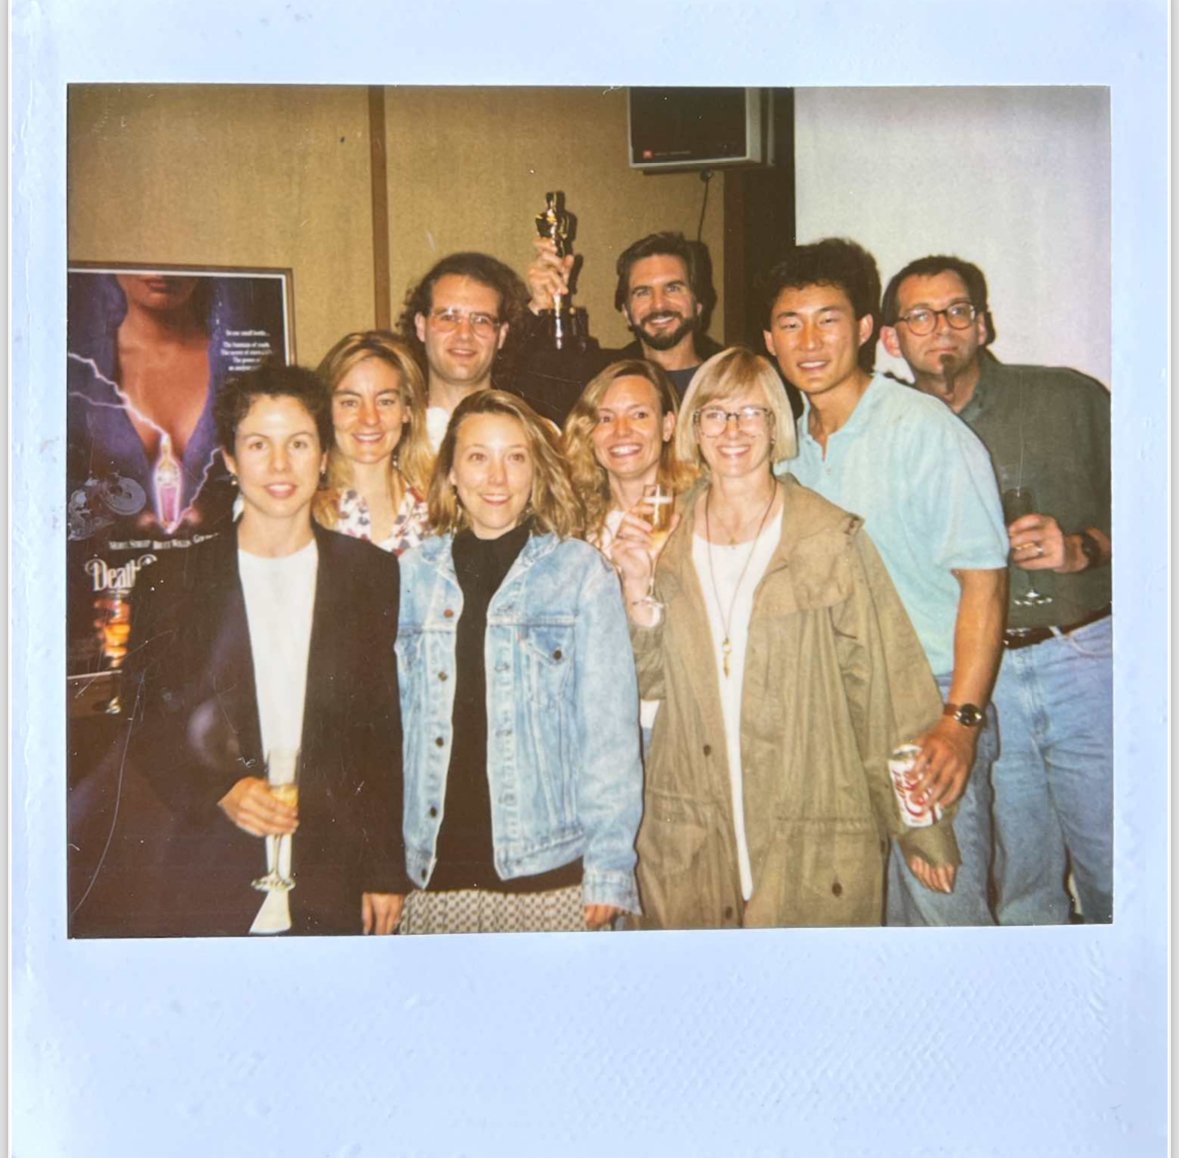  From left to right: Annie Calanchini, Jacqui Lopez, Doug Smythe, Judith Weaver, Gail Currey, Ken Ralston, Debbie Denise, Doug Chiang, and Bruce Vechitto. The production team from Death Becomes Her toasts the VFX Oscar for 1993 at the old ILM in San 